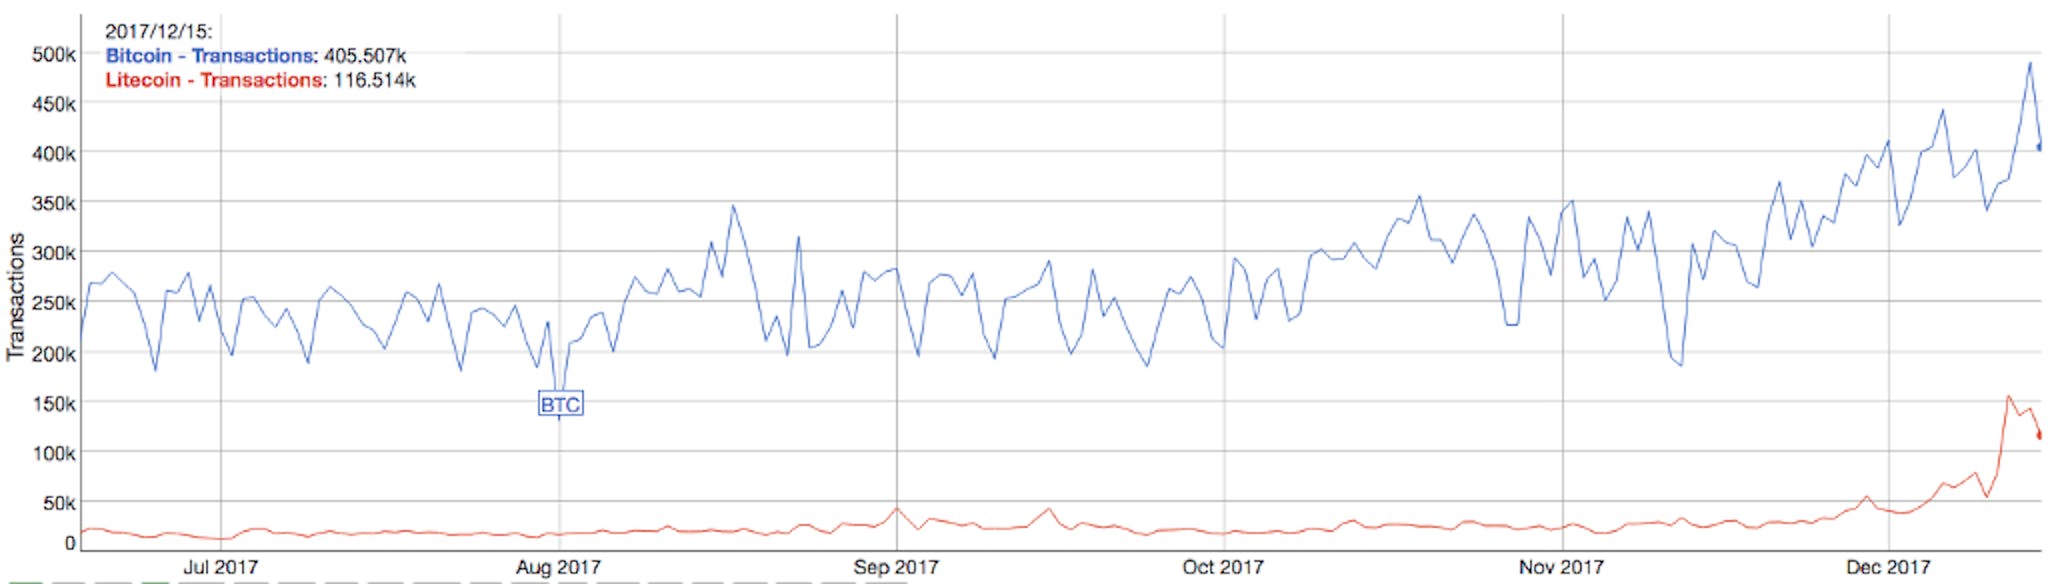 featured image - Litecoin catching Bitcoin in transaction volume and value.